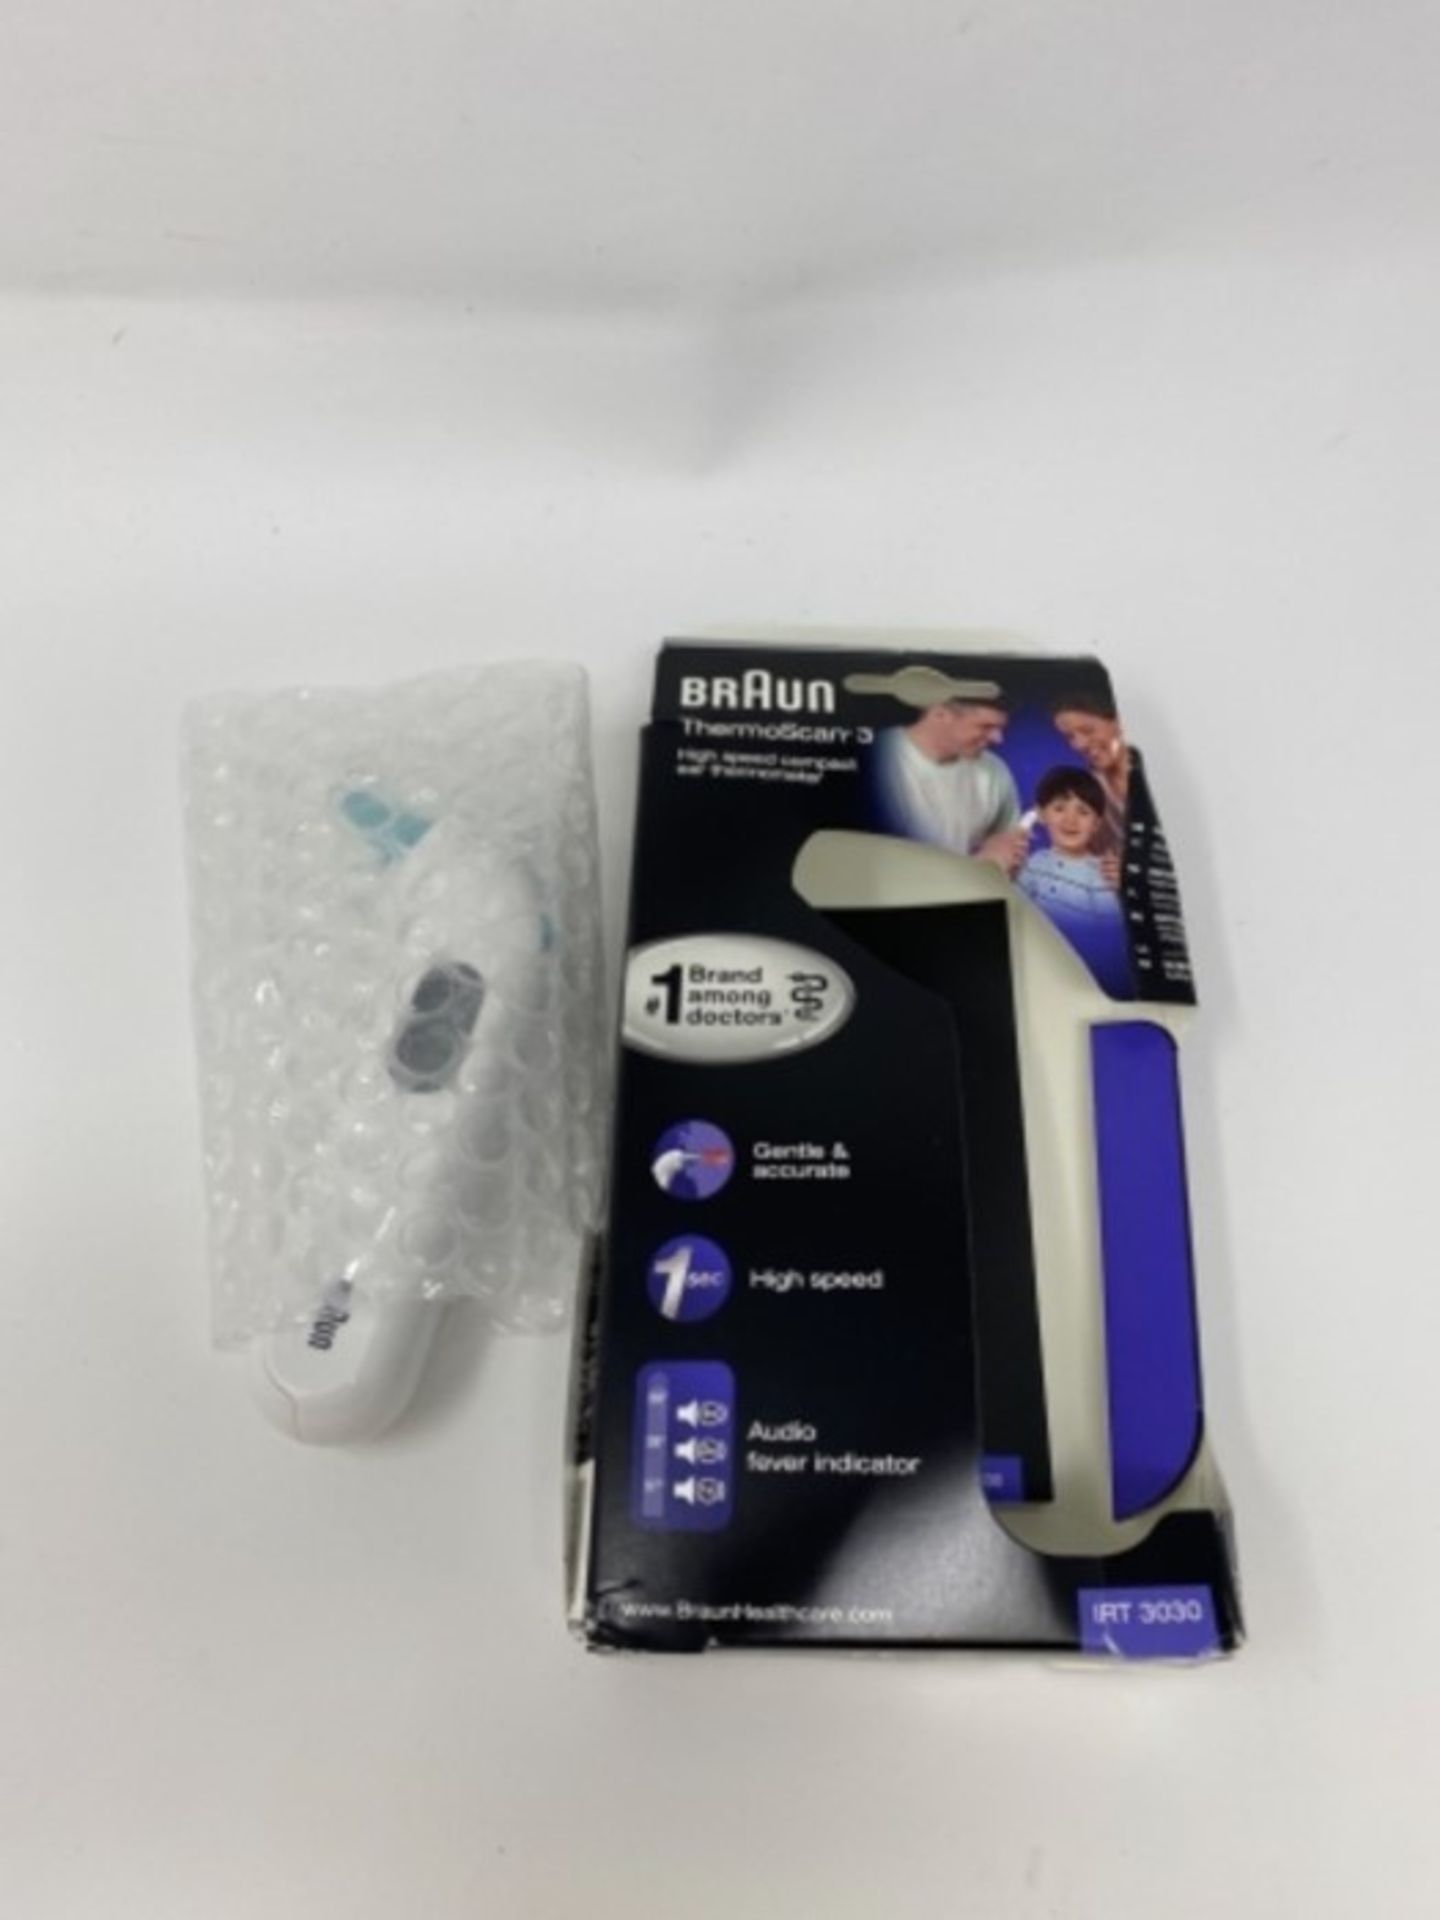 Braun IRT3030 ThermoScan 3 Infrared Ear Thermome - Image 2 of 2